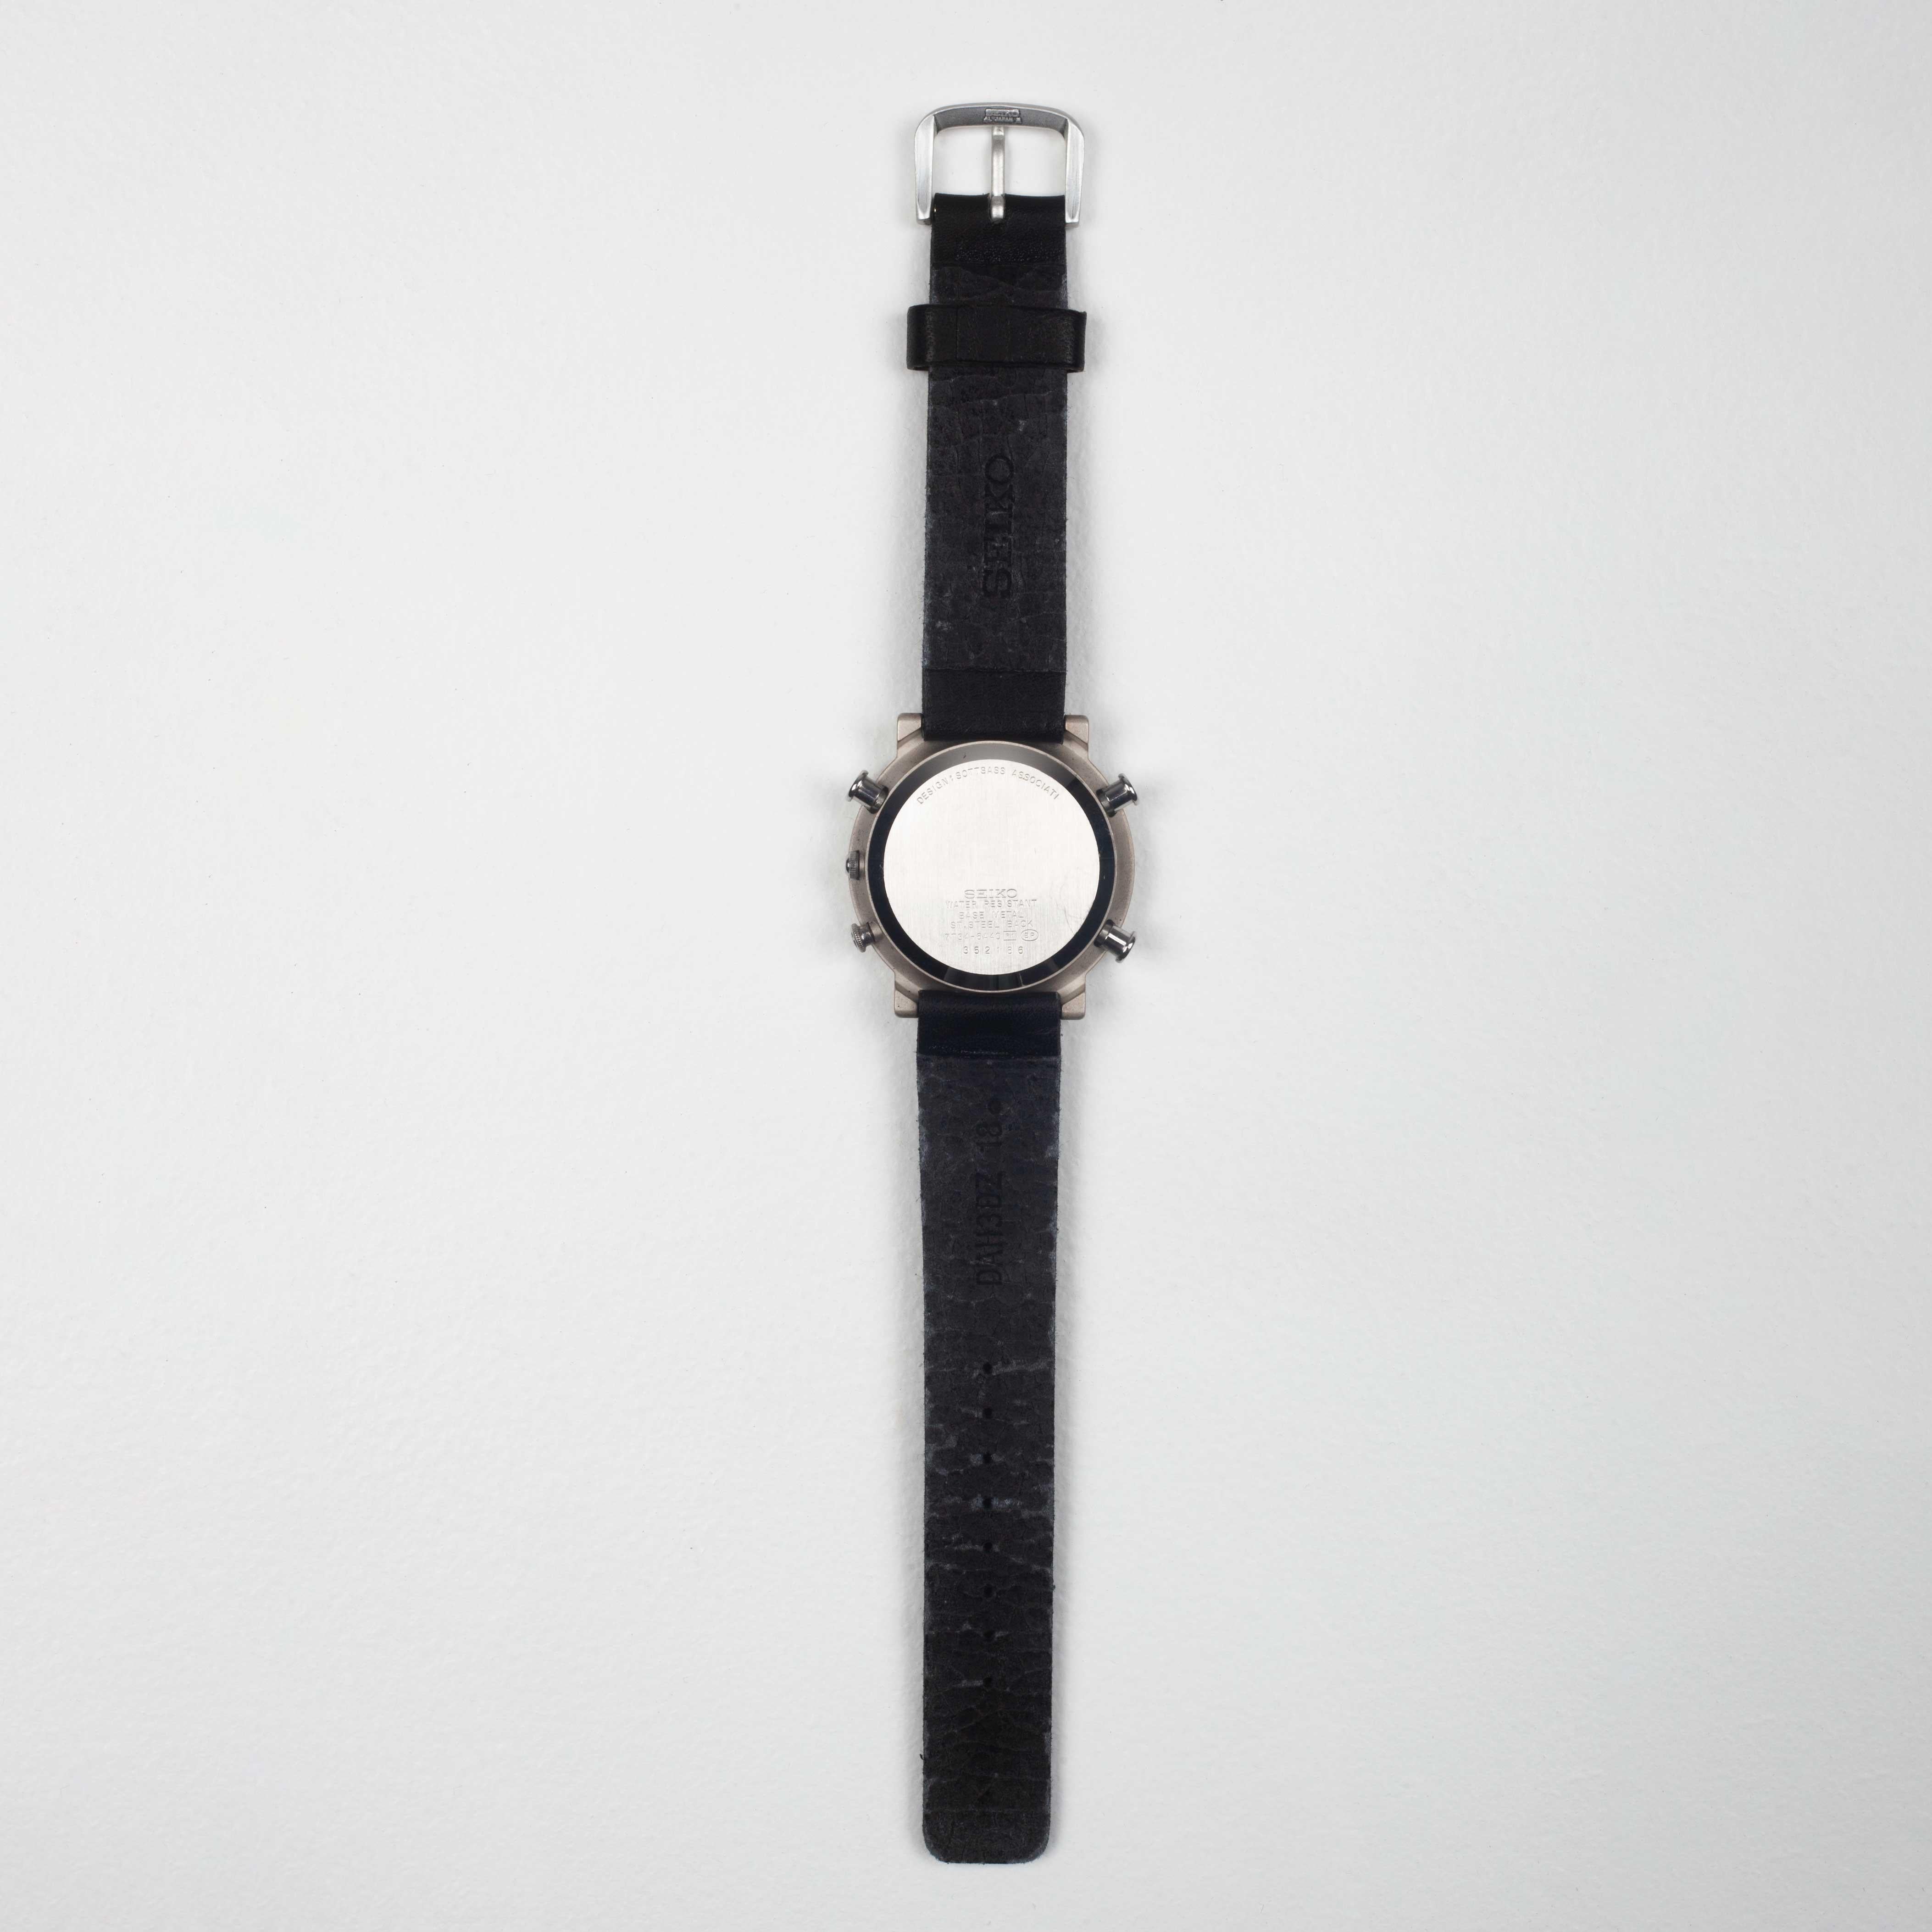 Post-Modern Ettore Sottsass Chronograph Watch, Collection Sottsass for Seiko, Japan, 1993